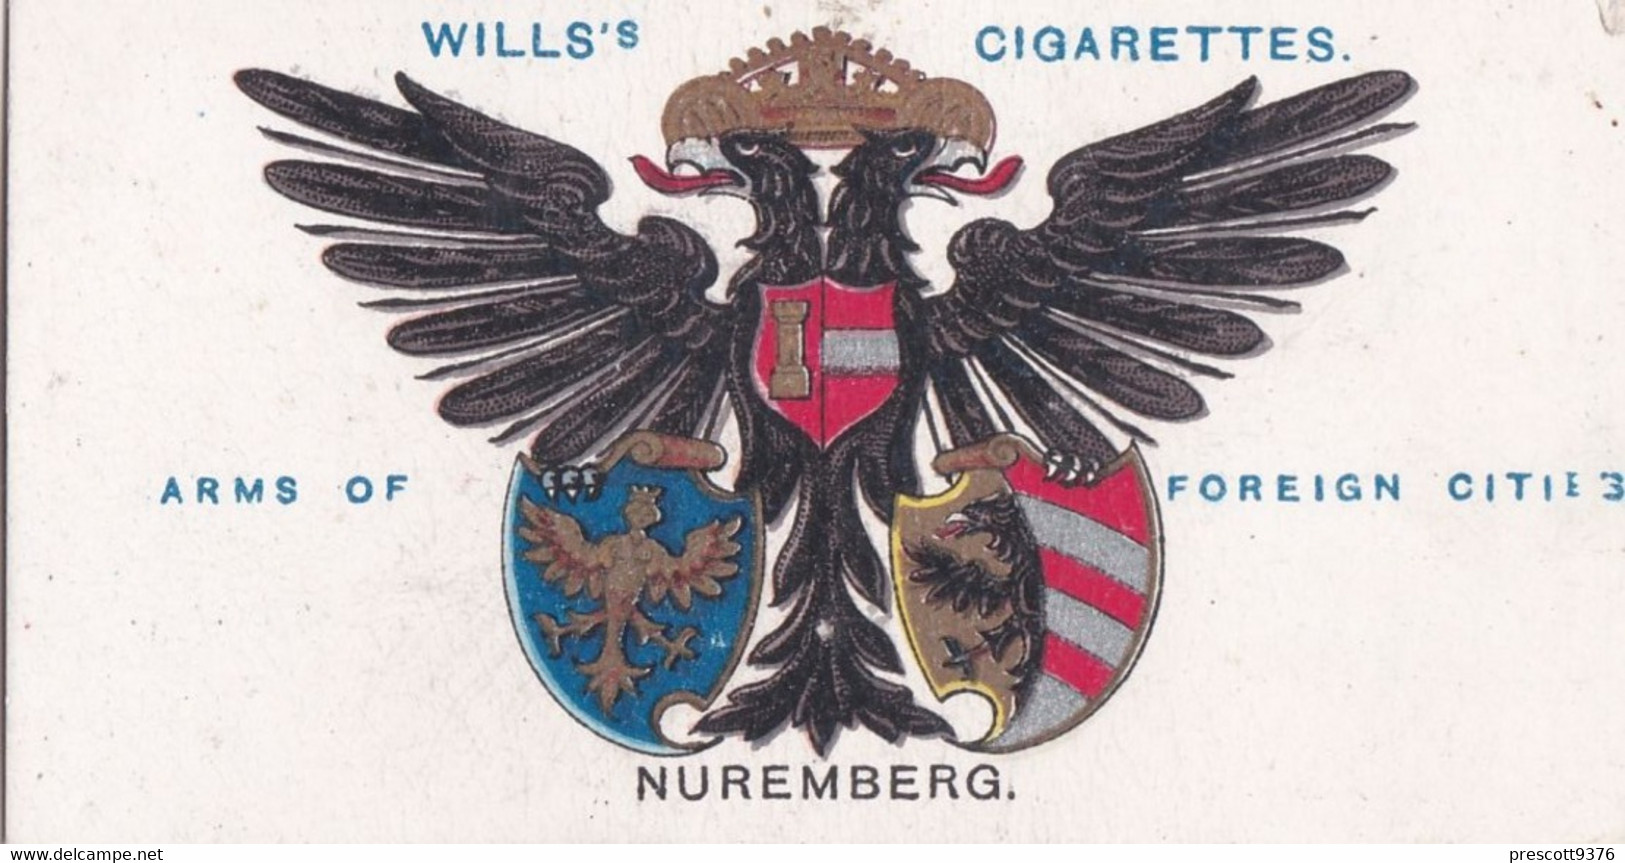 41 Nuremberg  -  Arms Of Foreign Cities - 1912 - Wills Cigarette Cards - Original  - Antique - Player's